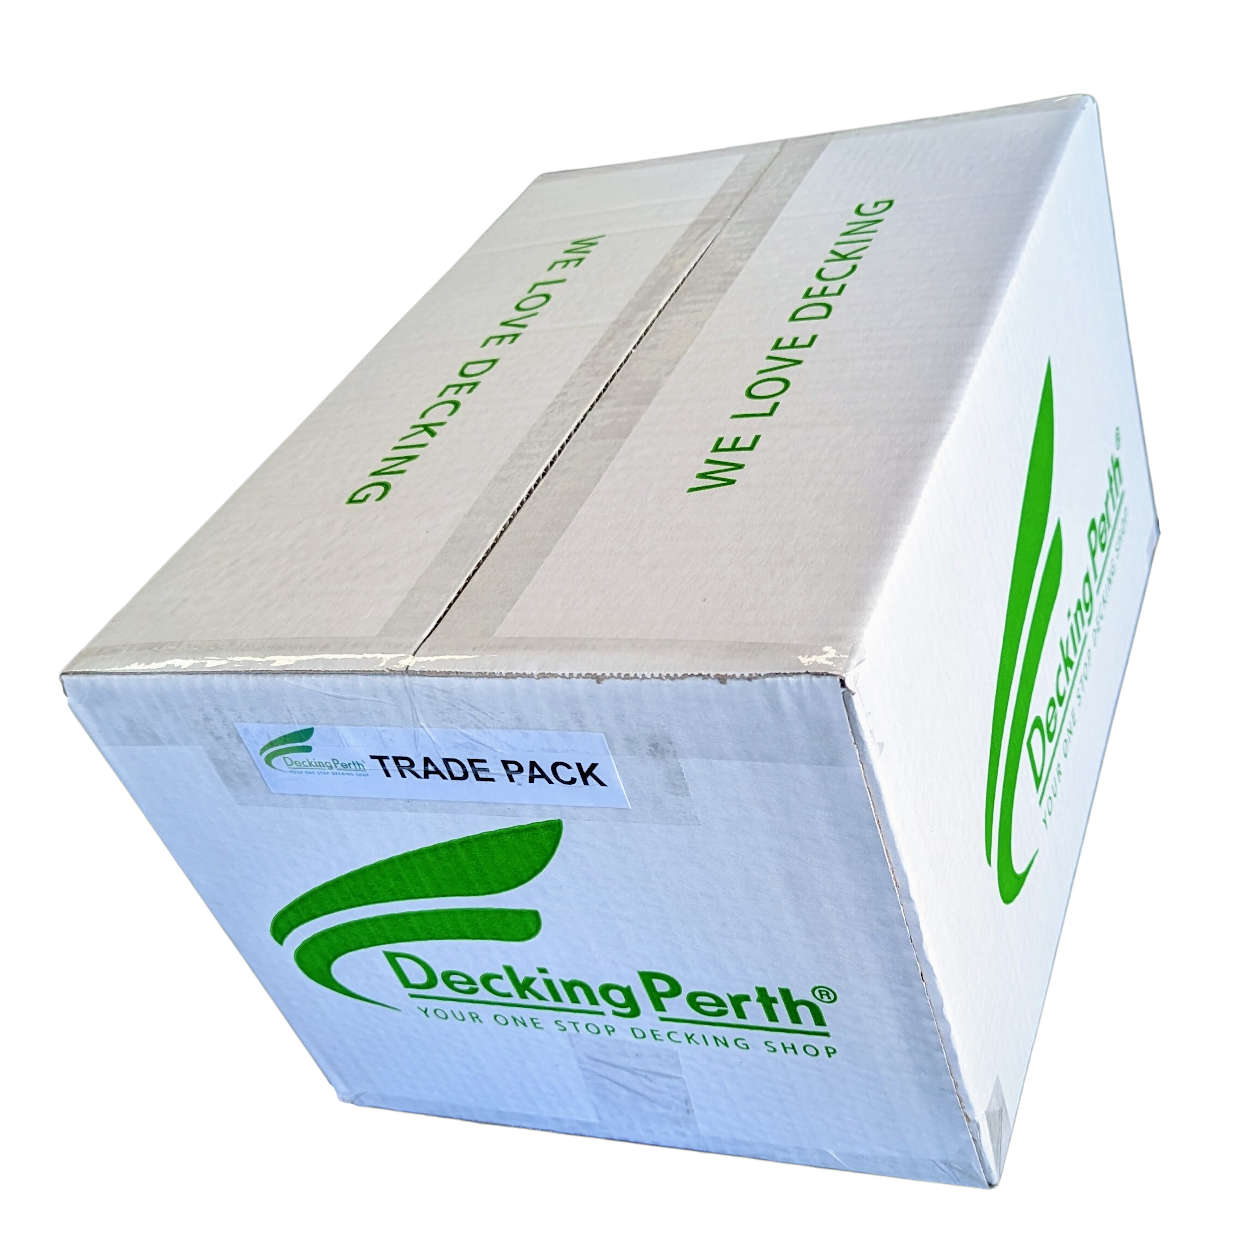 DECKING PERTH - Trade Pack, composite and timber decking samples, hats, shirts, pens, pencils, brochures etc.